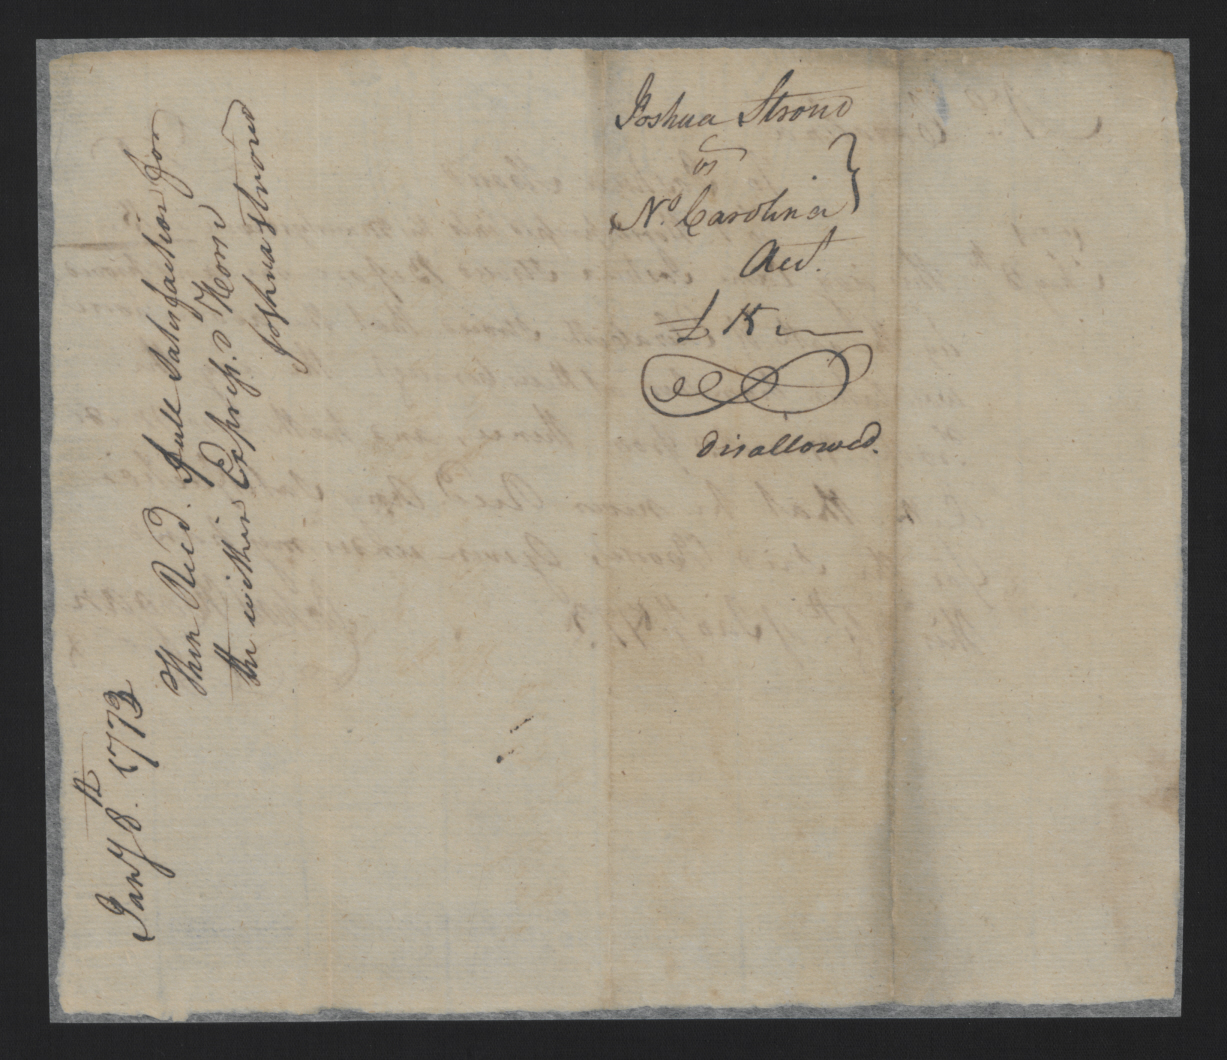 Claim from Joshua Stroud on Behalf of Elizabeth Stroud for the Impressment of a Horse, 4 January 1773, page 2.